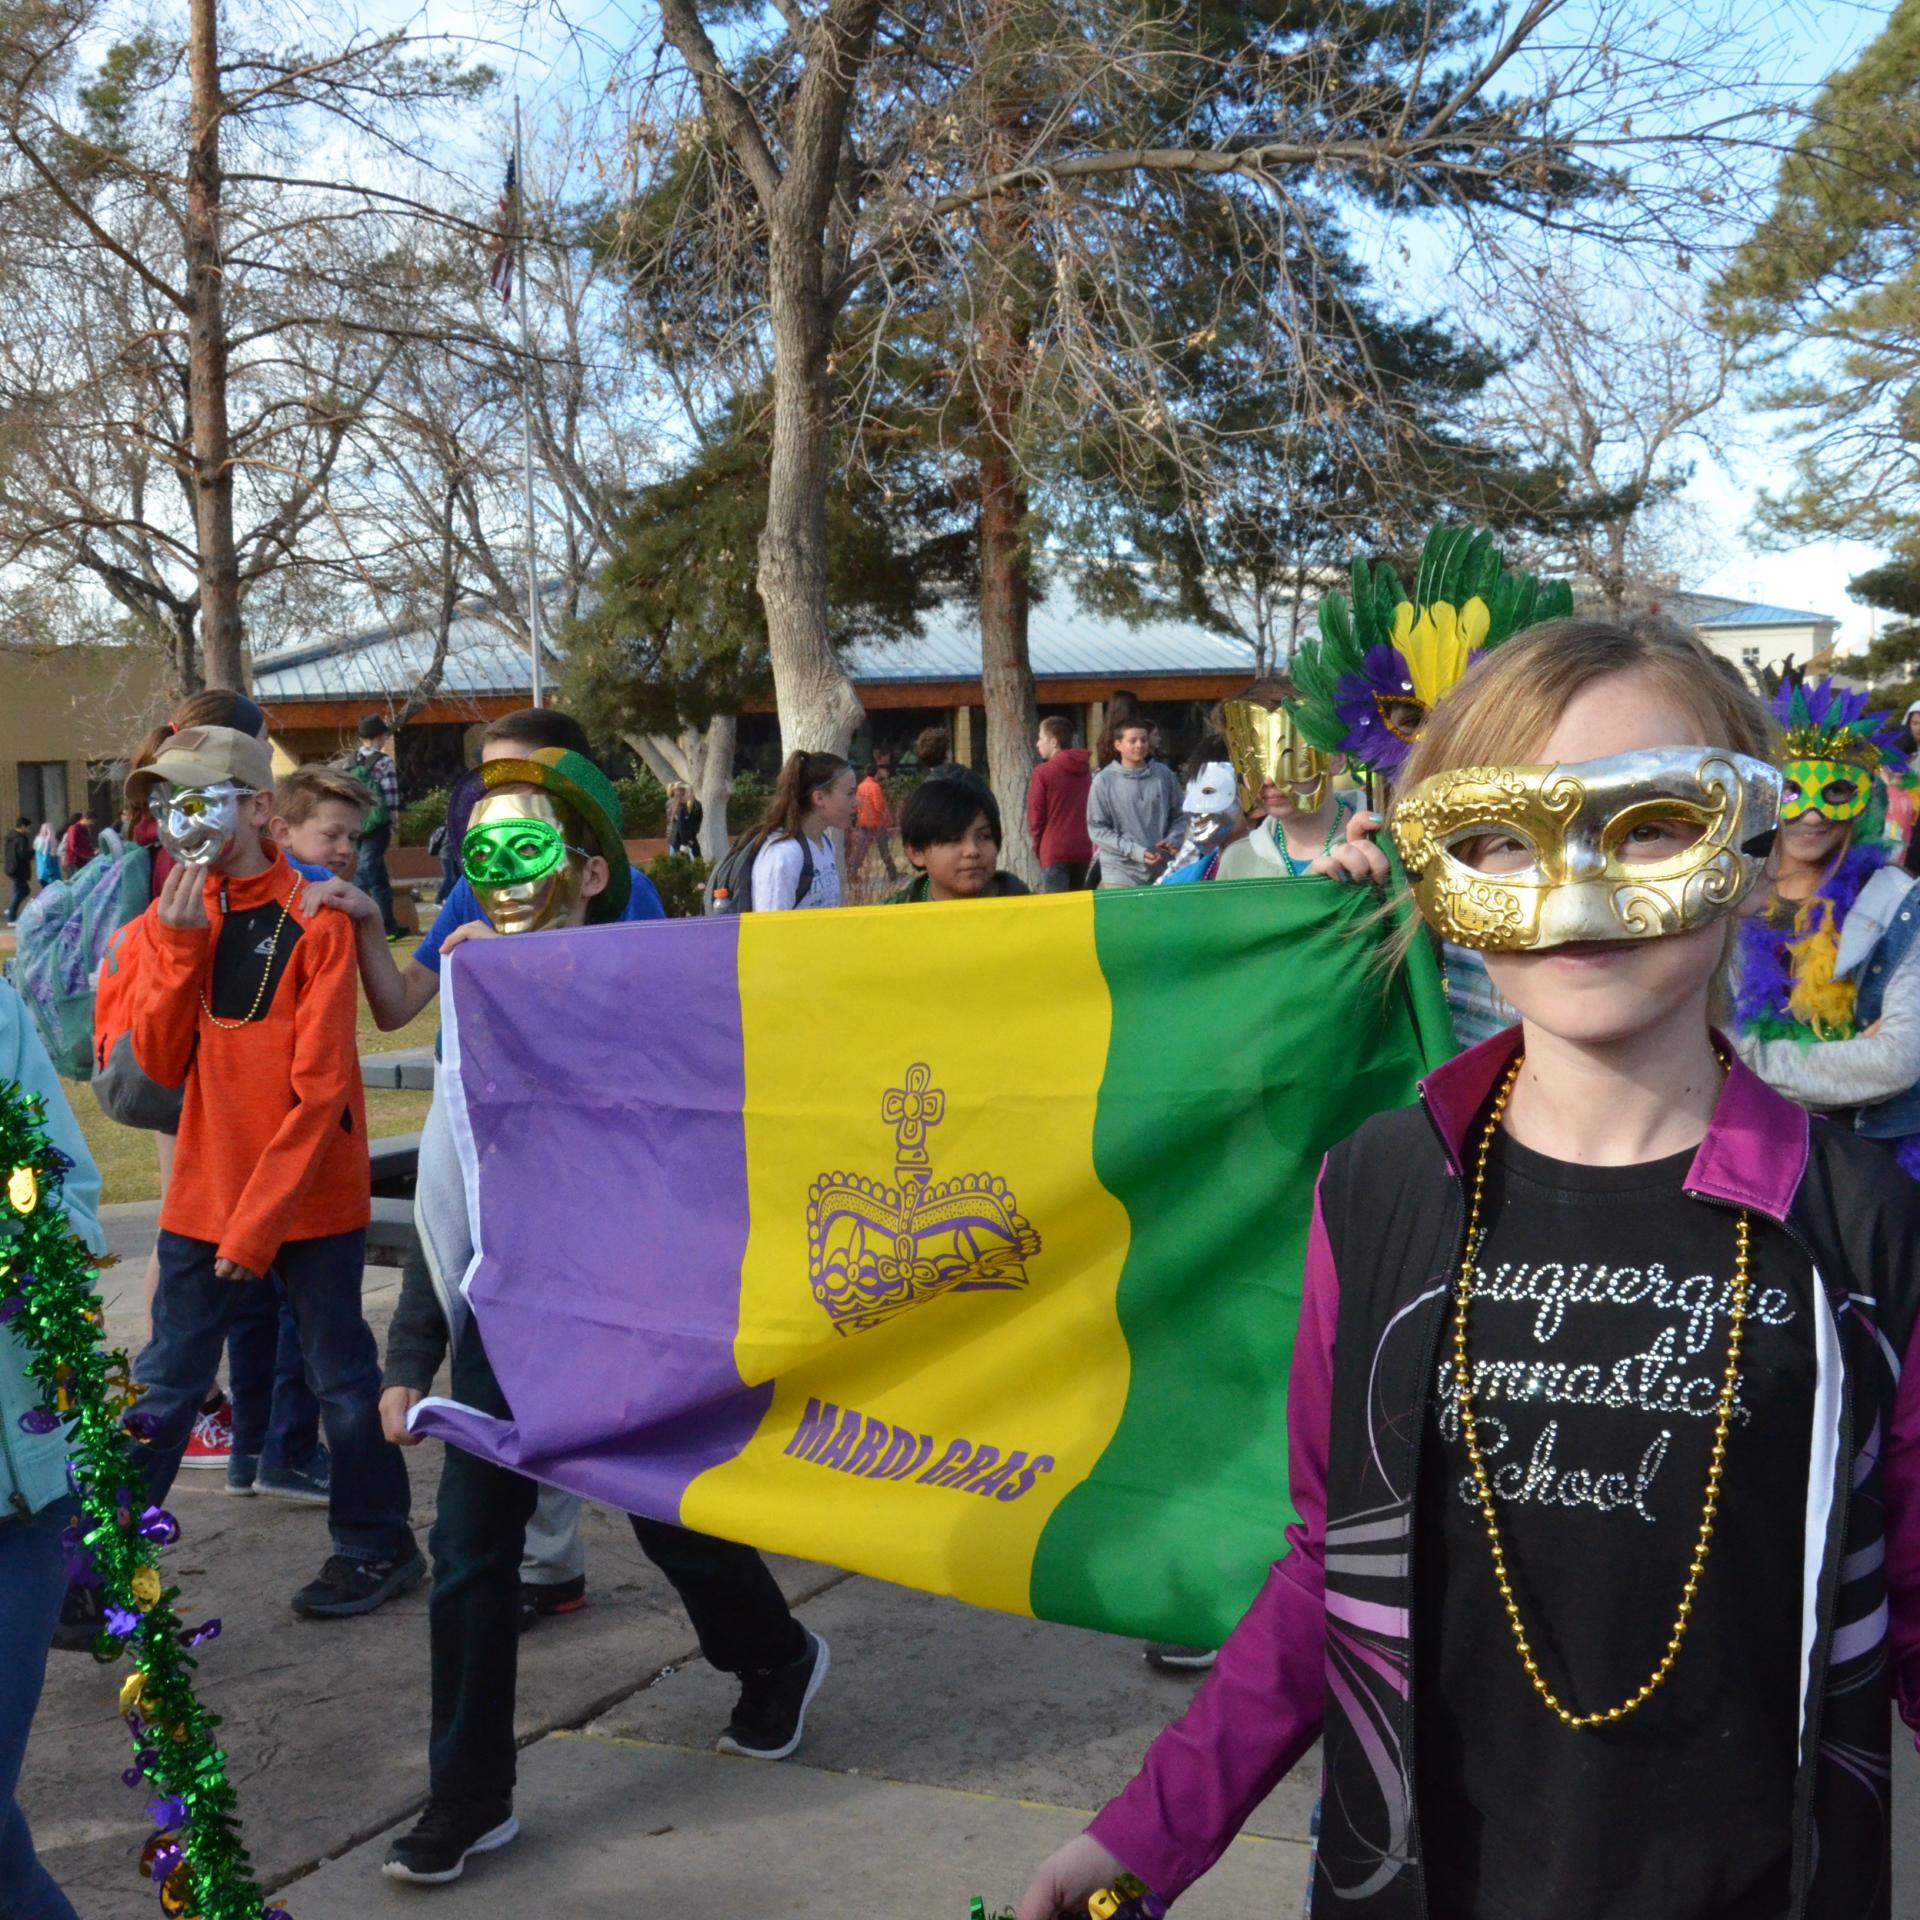 Mardi Gras Parade  Our French classes celebrate Mardi Gras each year with a parade of student-made floats on the Quad, jazz band students playing “When the Saints Go Marching In,” costumes, and food.